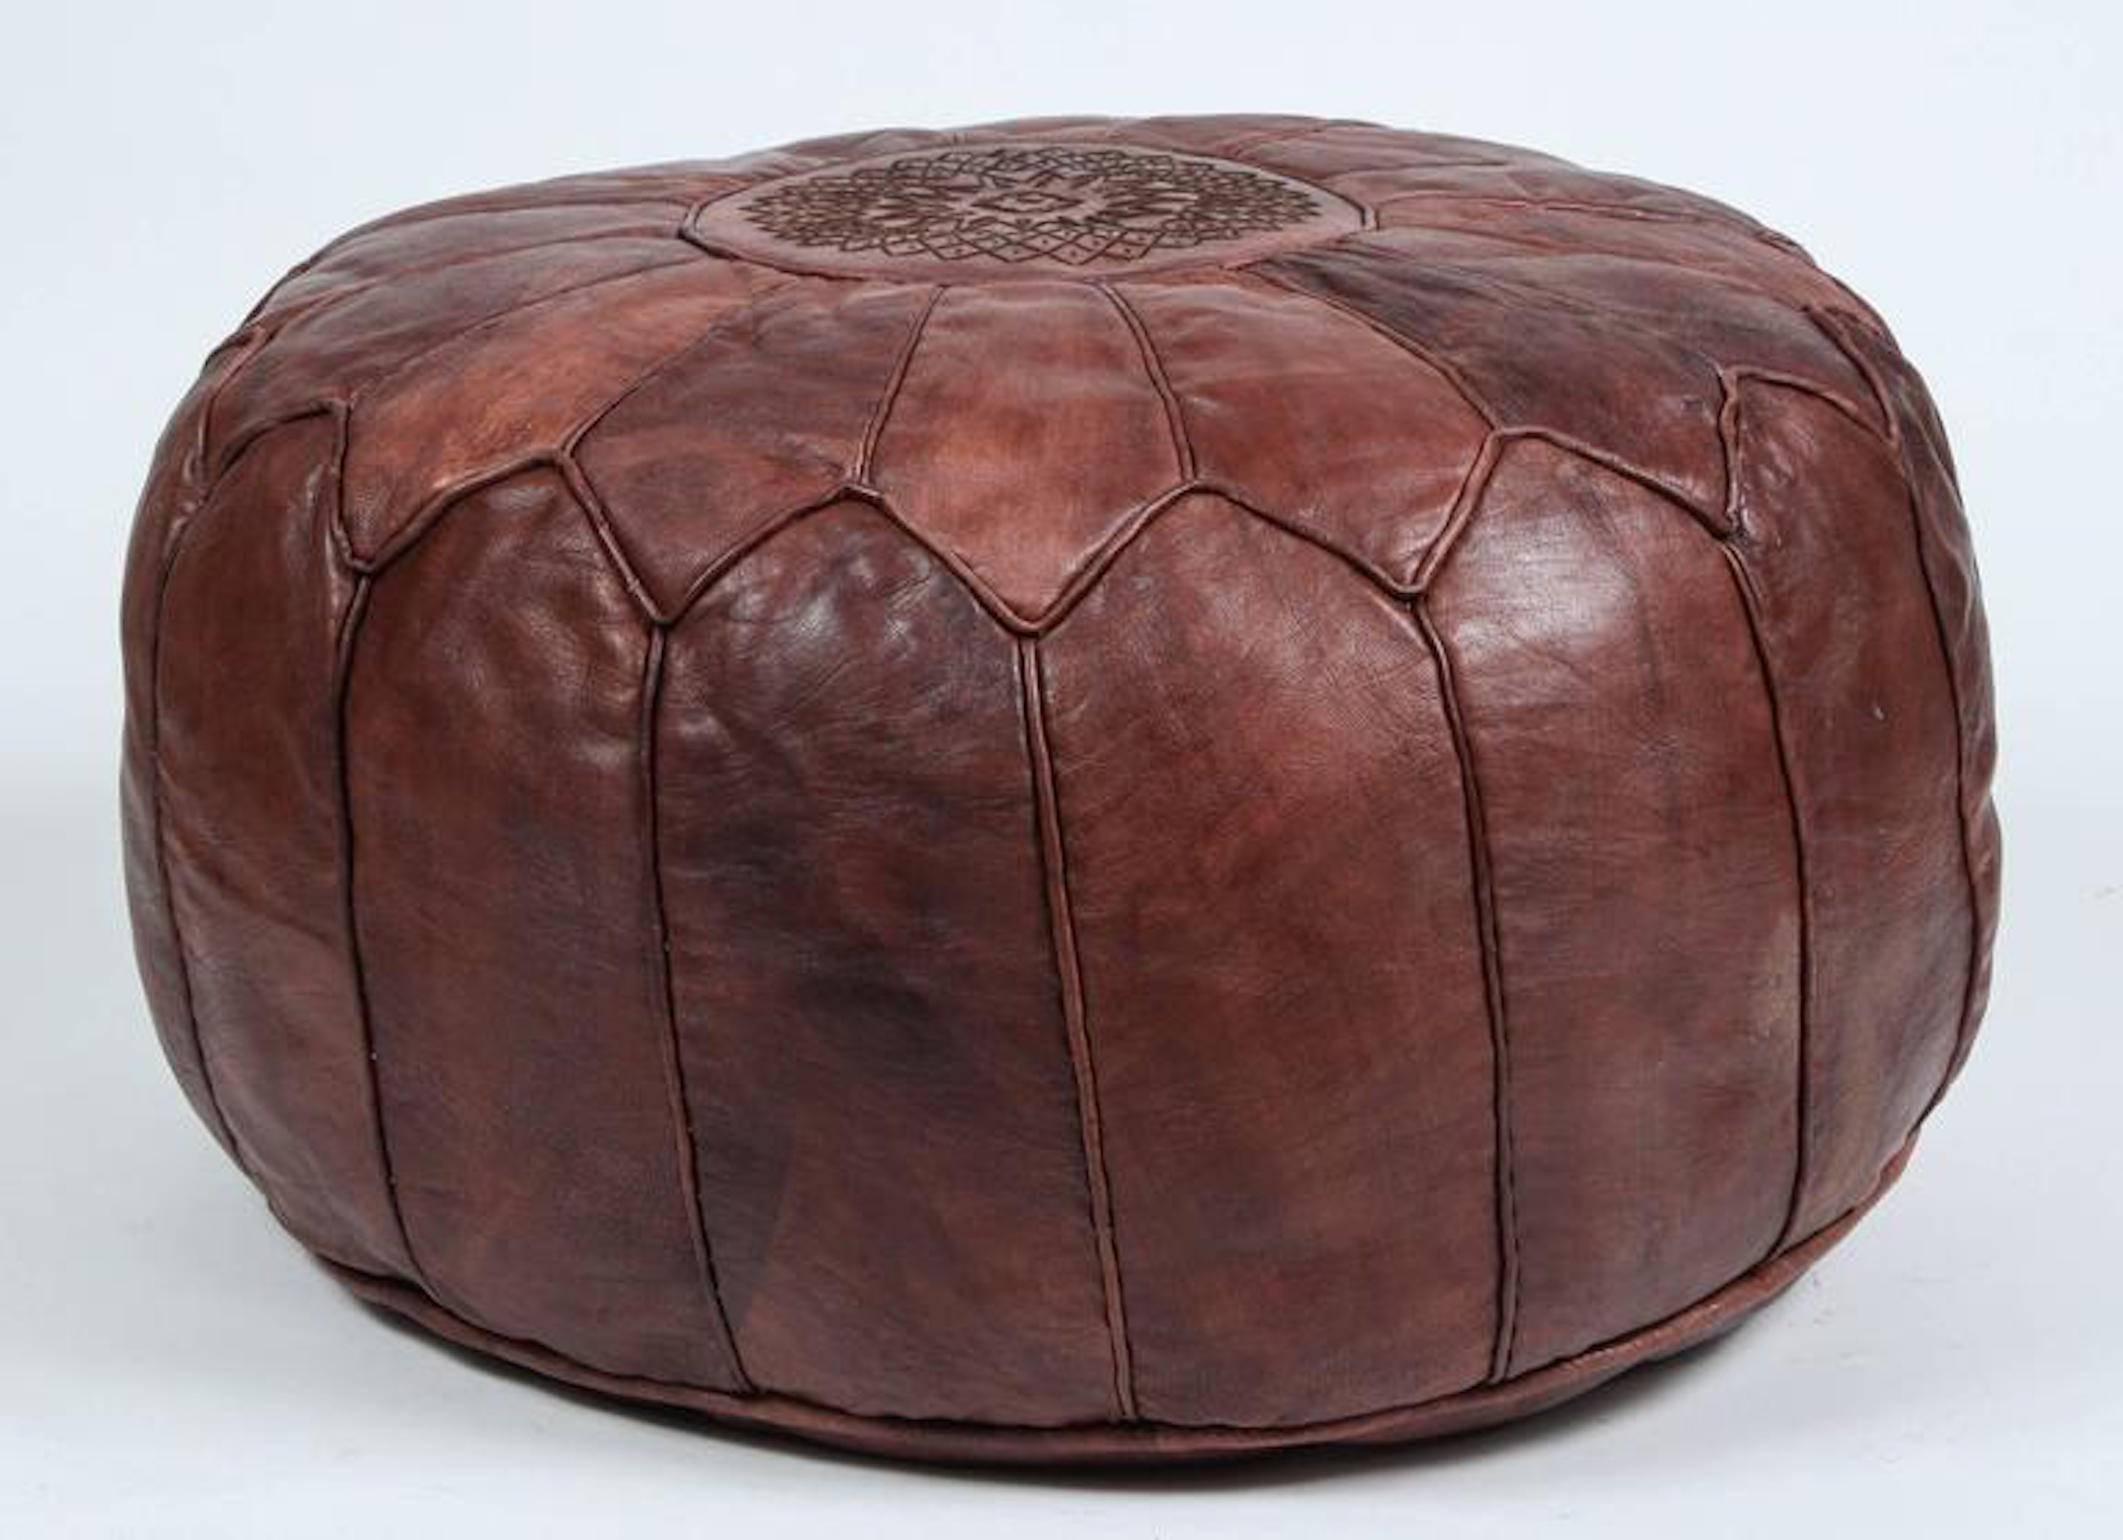 Hand-Crafted Large Vintage Round Moroccan Leather Pouf